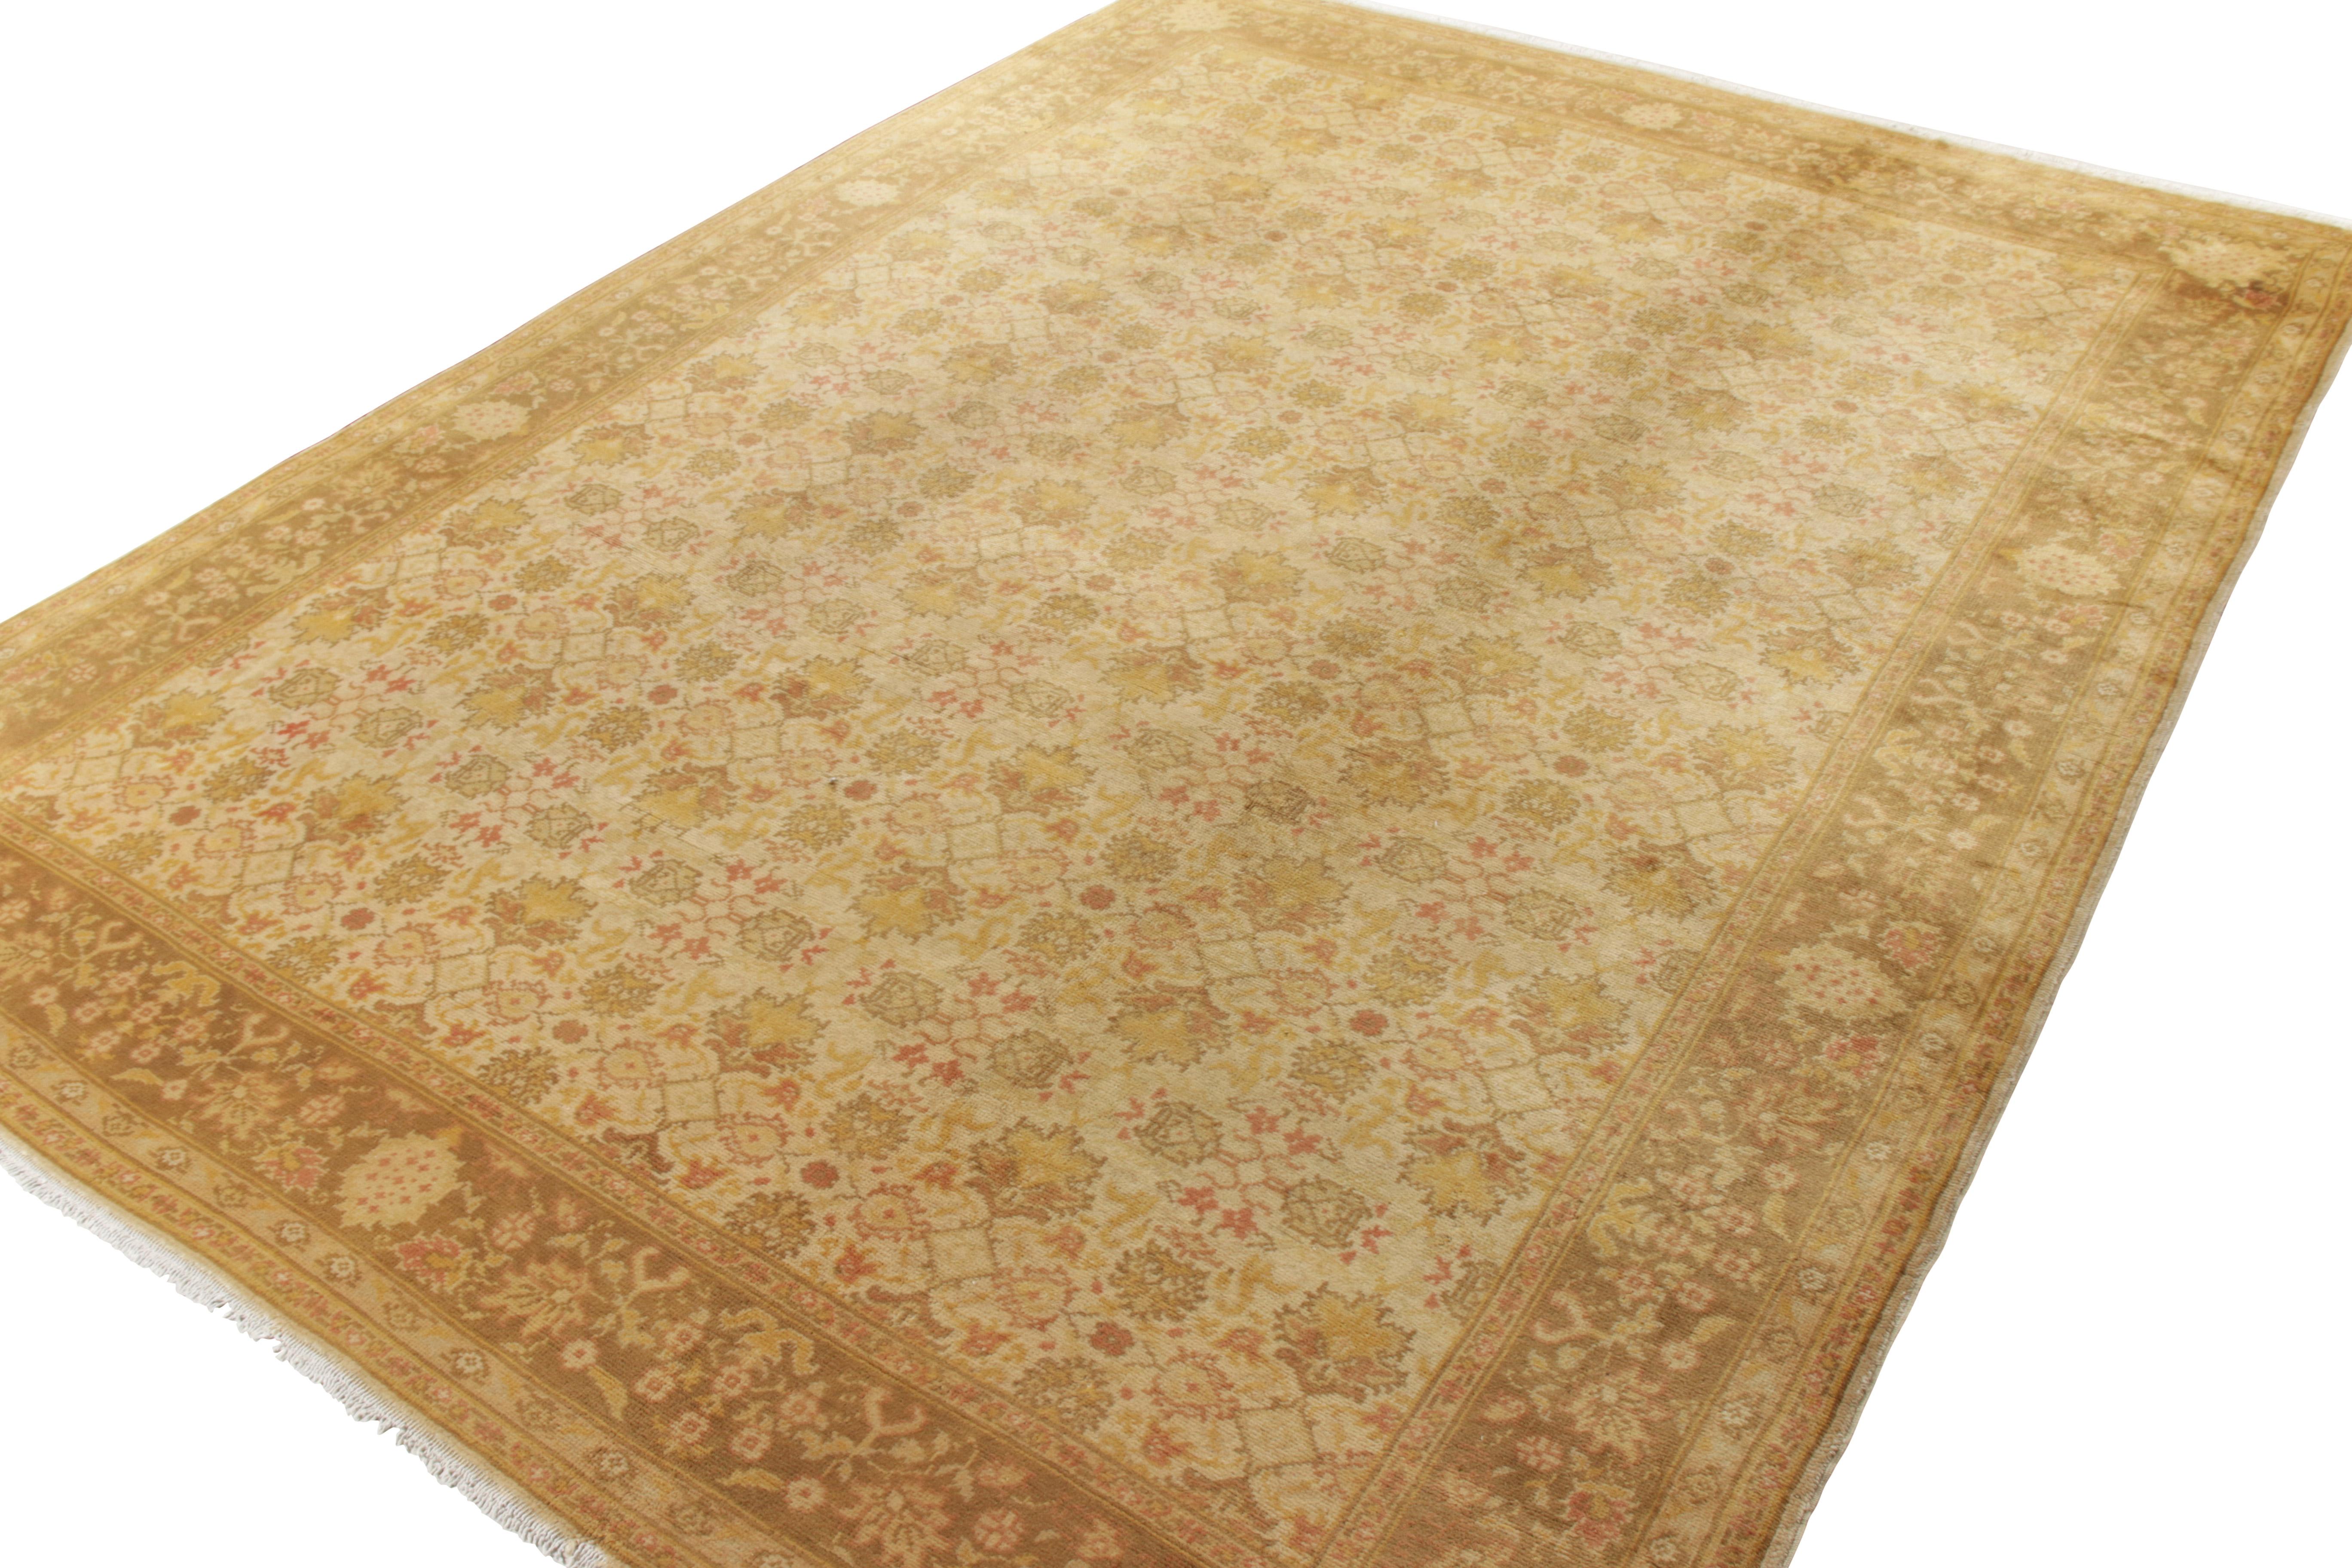 Turkish Vintage Oushak-Style European Rug in Gold and Beige-Brown Floral Pattern For Sale